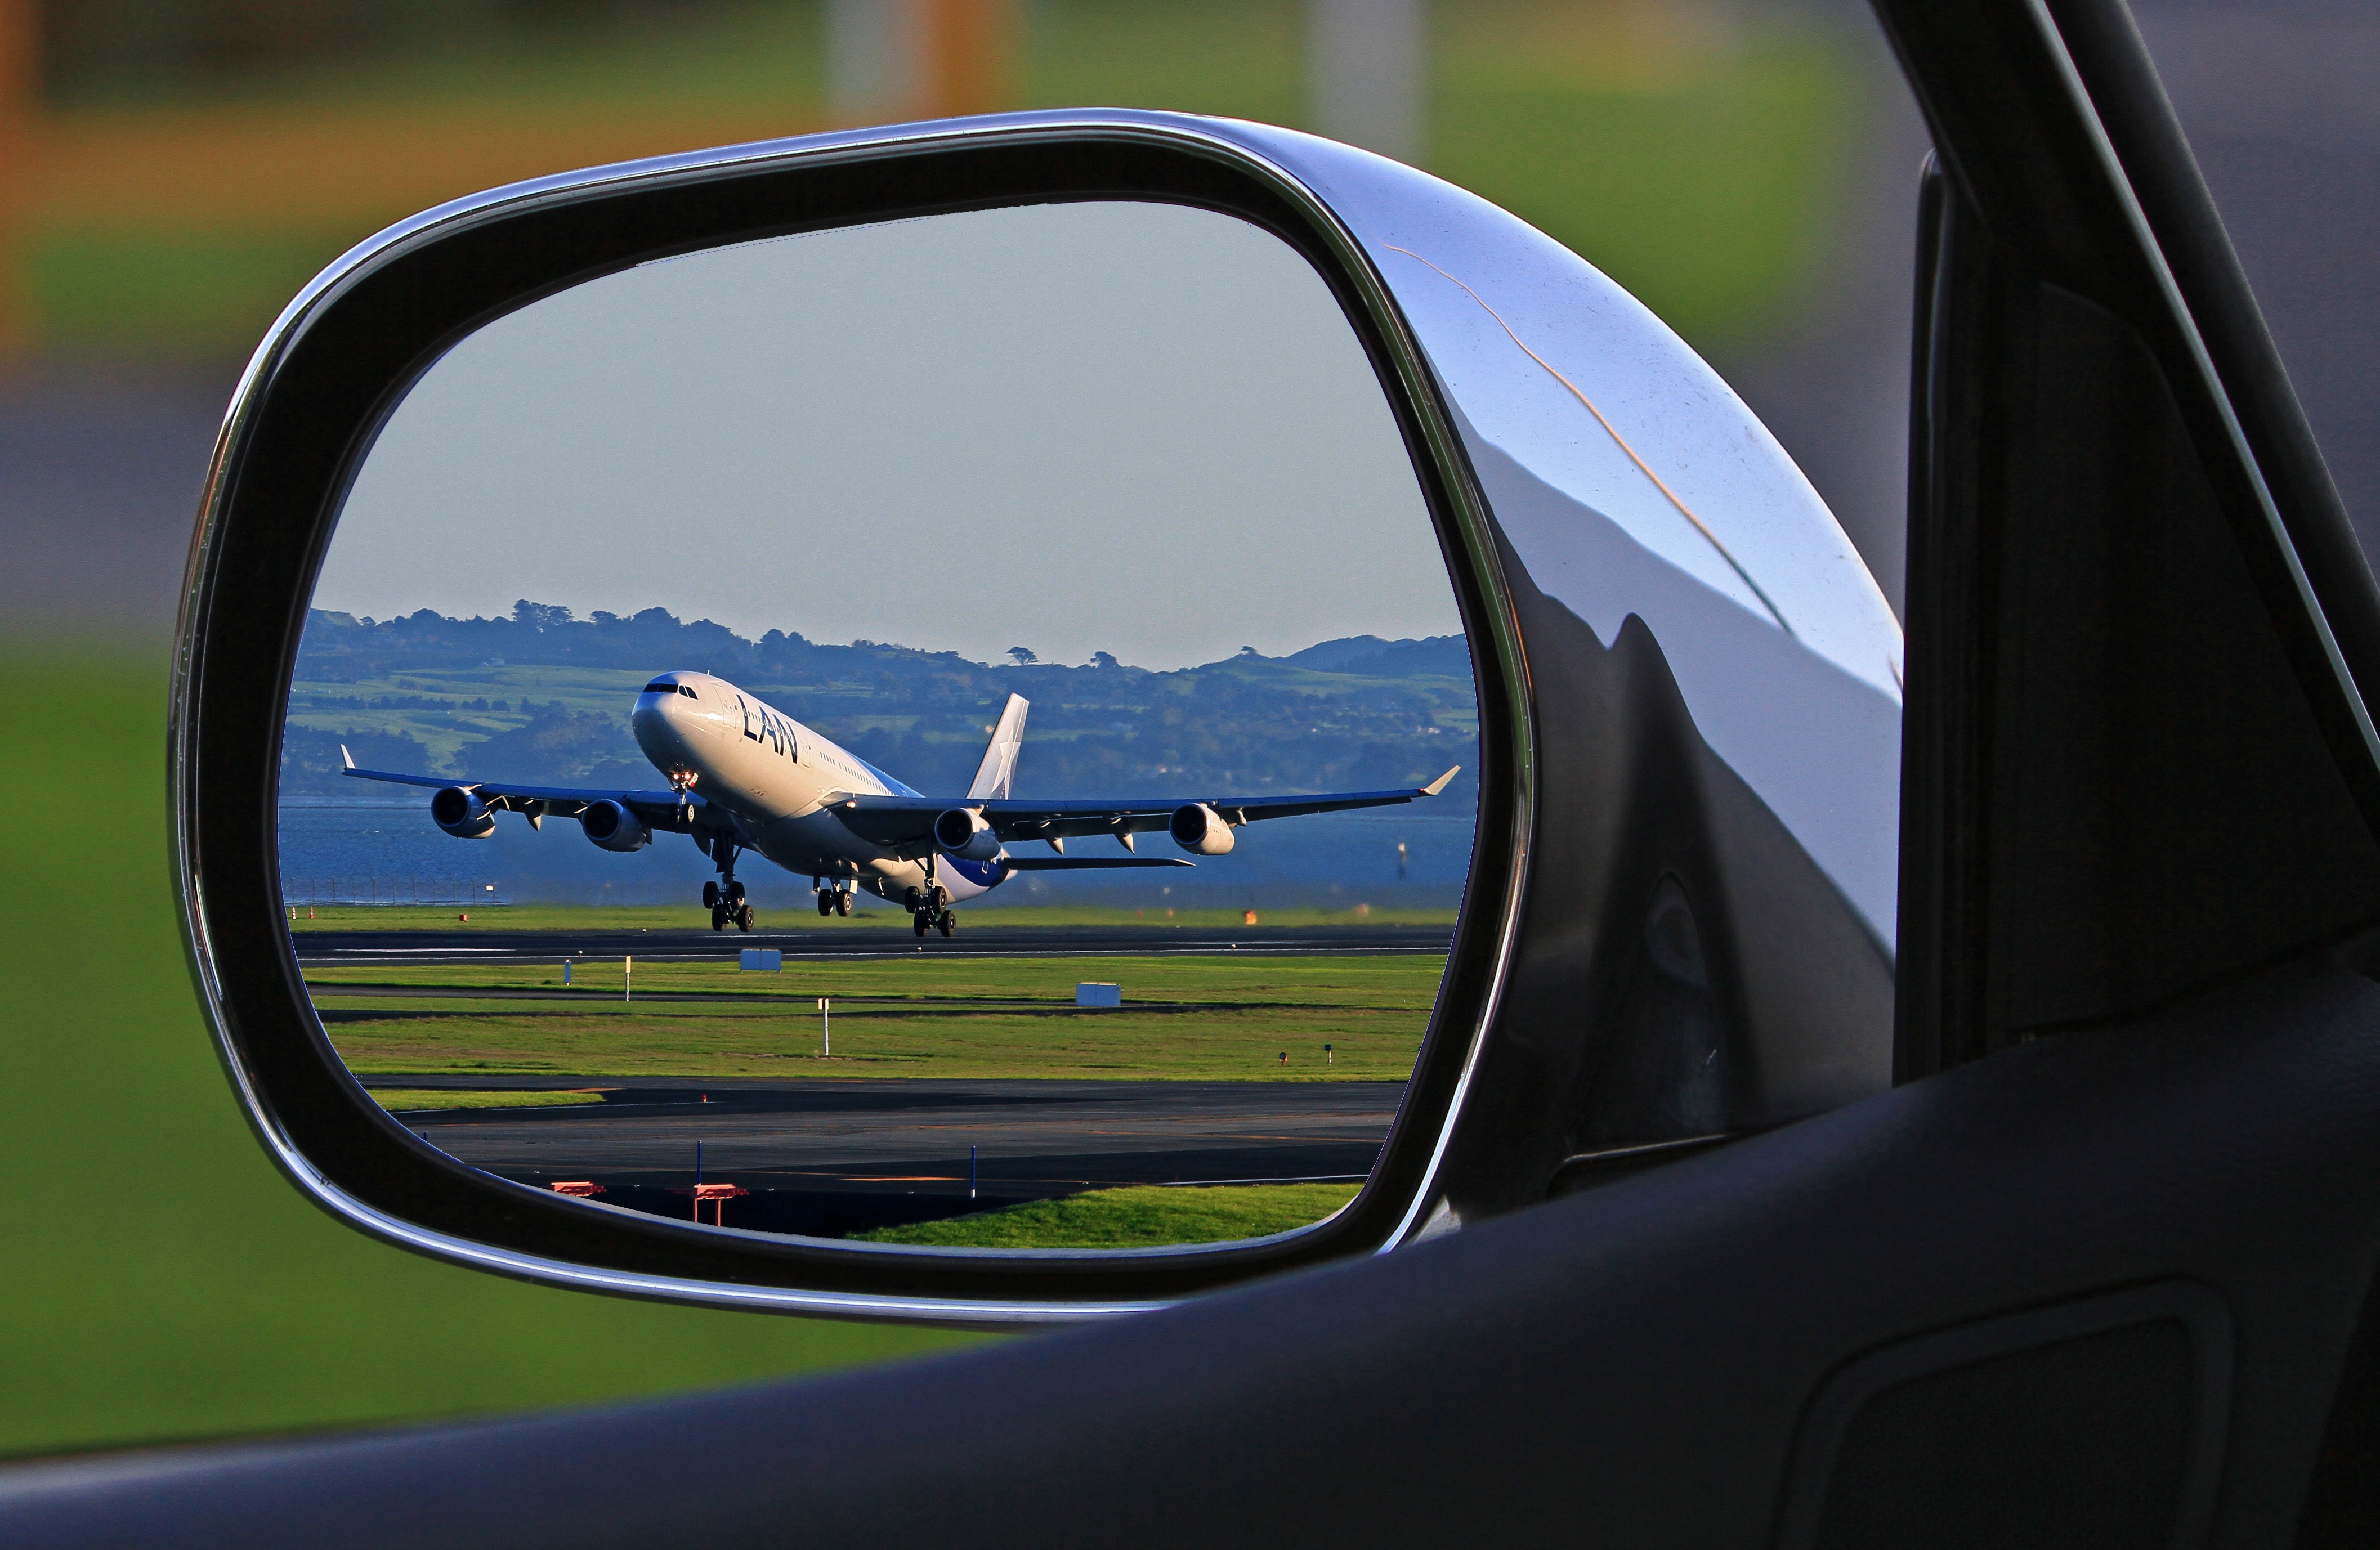 An lan airbus a320 in the side view mirror of a car by Holgi